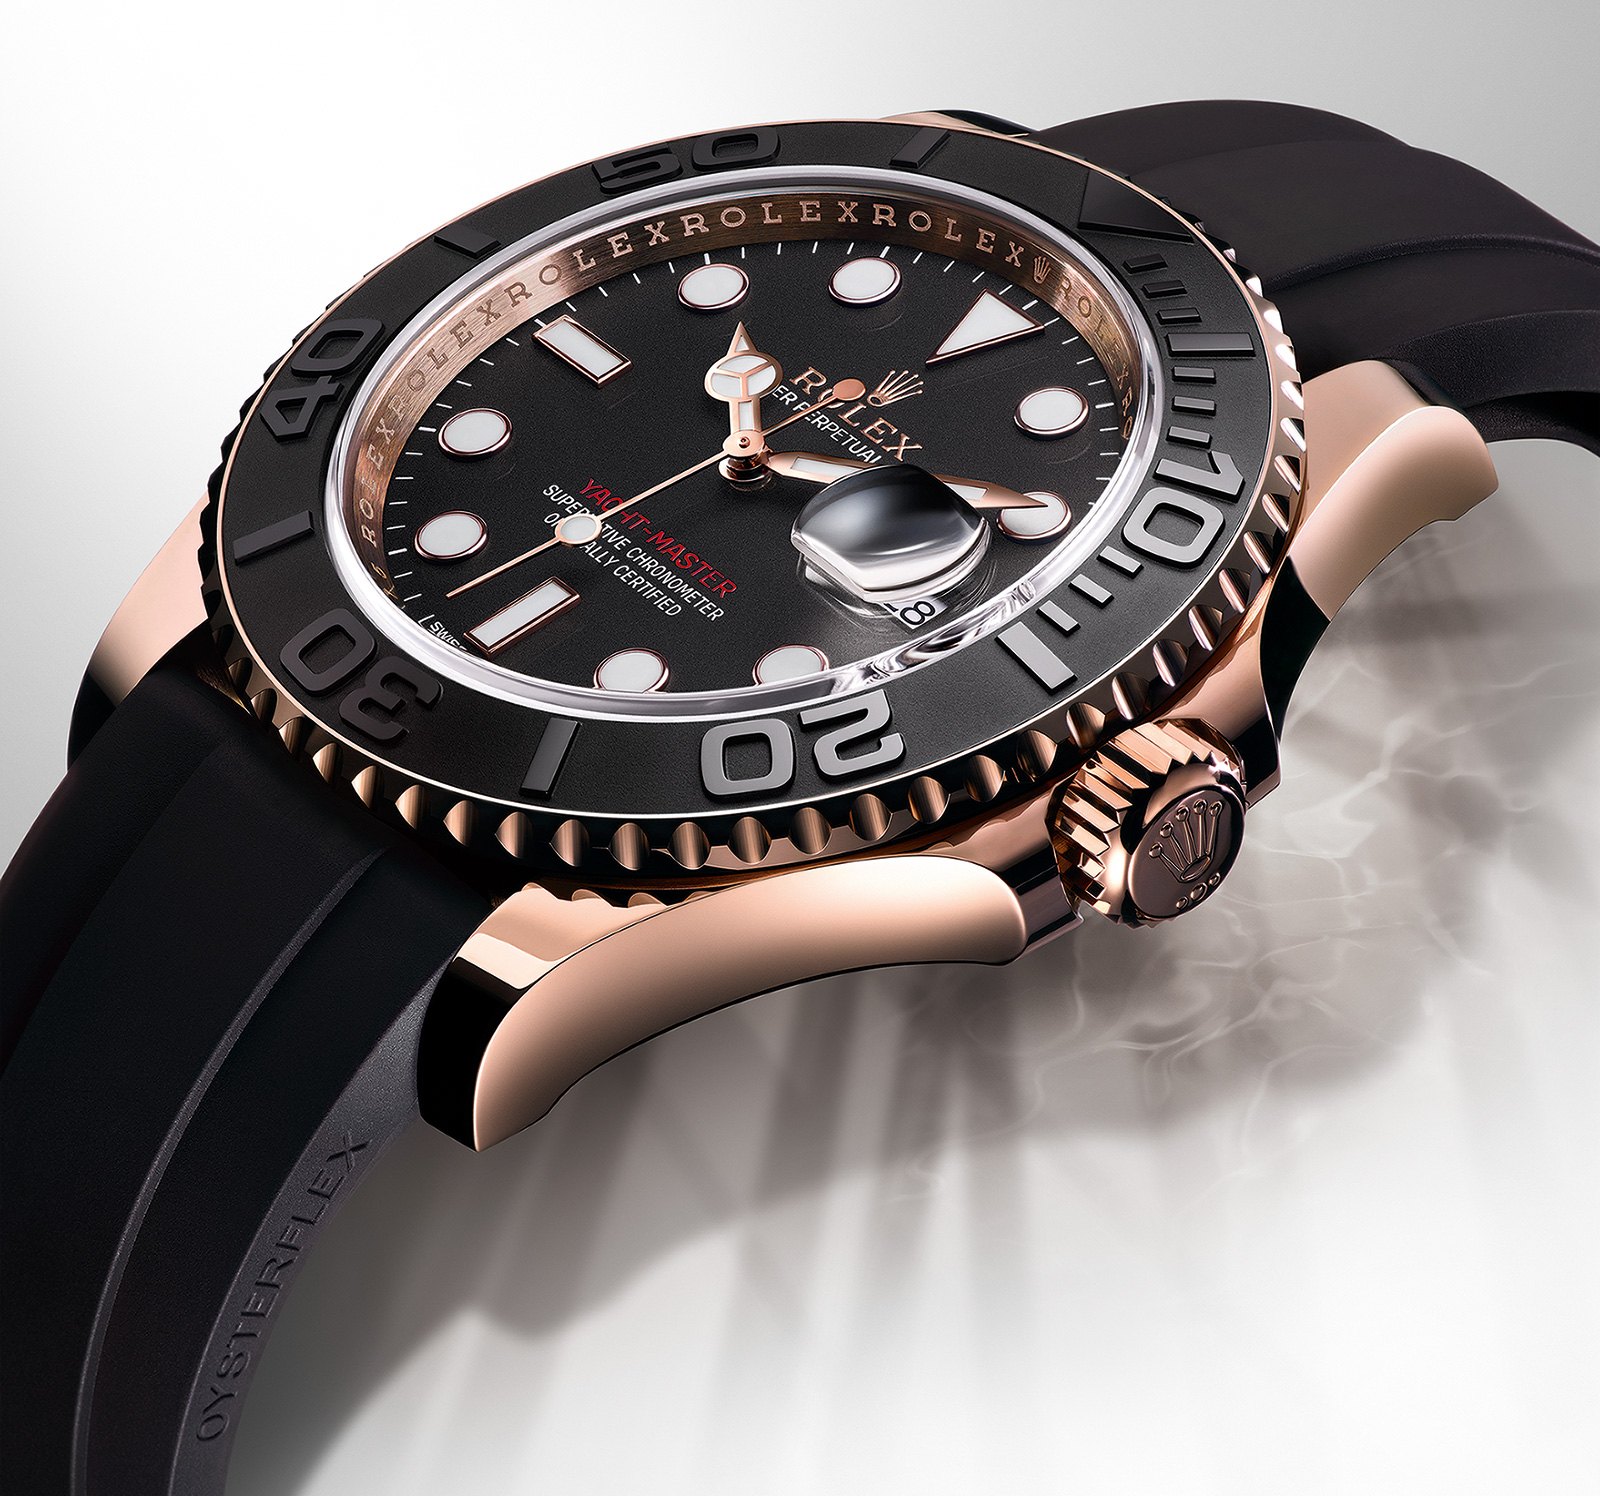 ... in a yacht master the dial is black with the rolex logo in gold along